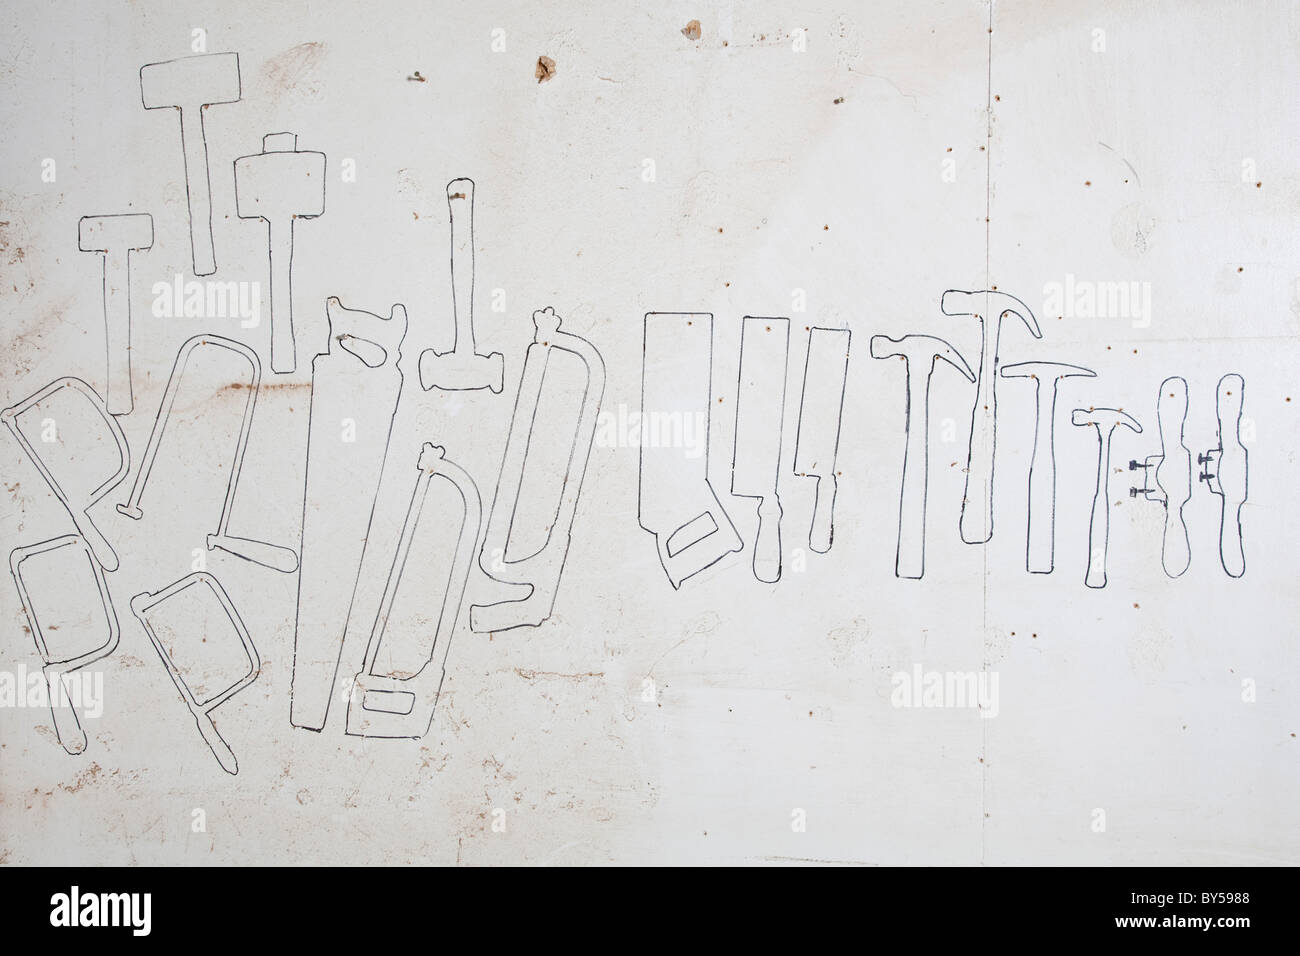 Drawn outlines of hand tools on a wall Stock Photo